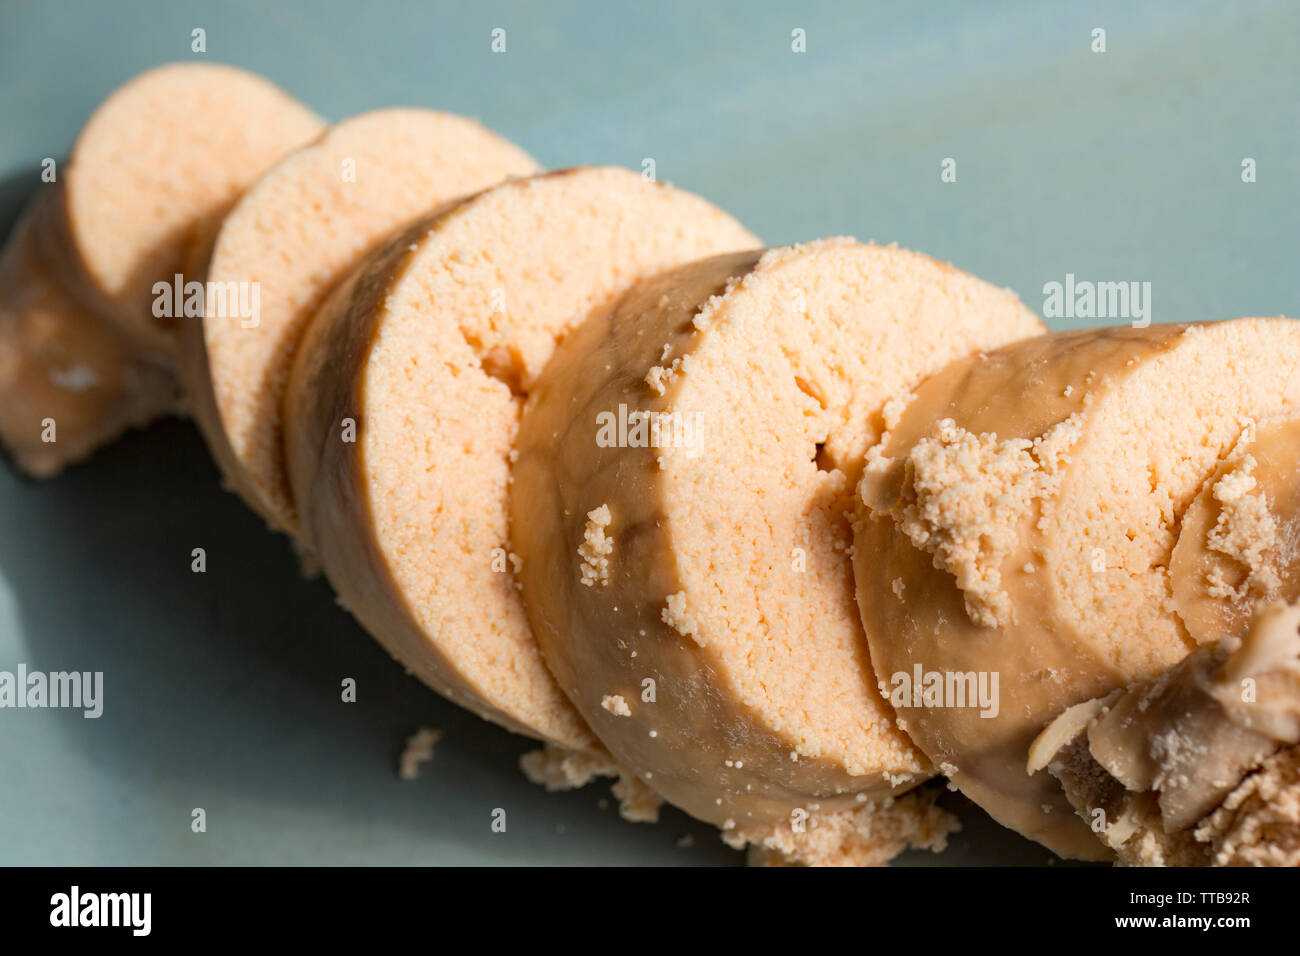 Cod roe that has been boiled, allowed to cool and then sliced before frying. The cod, Gadus morhua, was caught in the north eastern Atlantic and bough Stock Photo